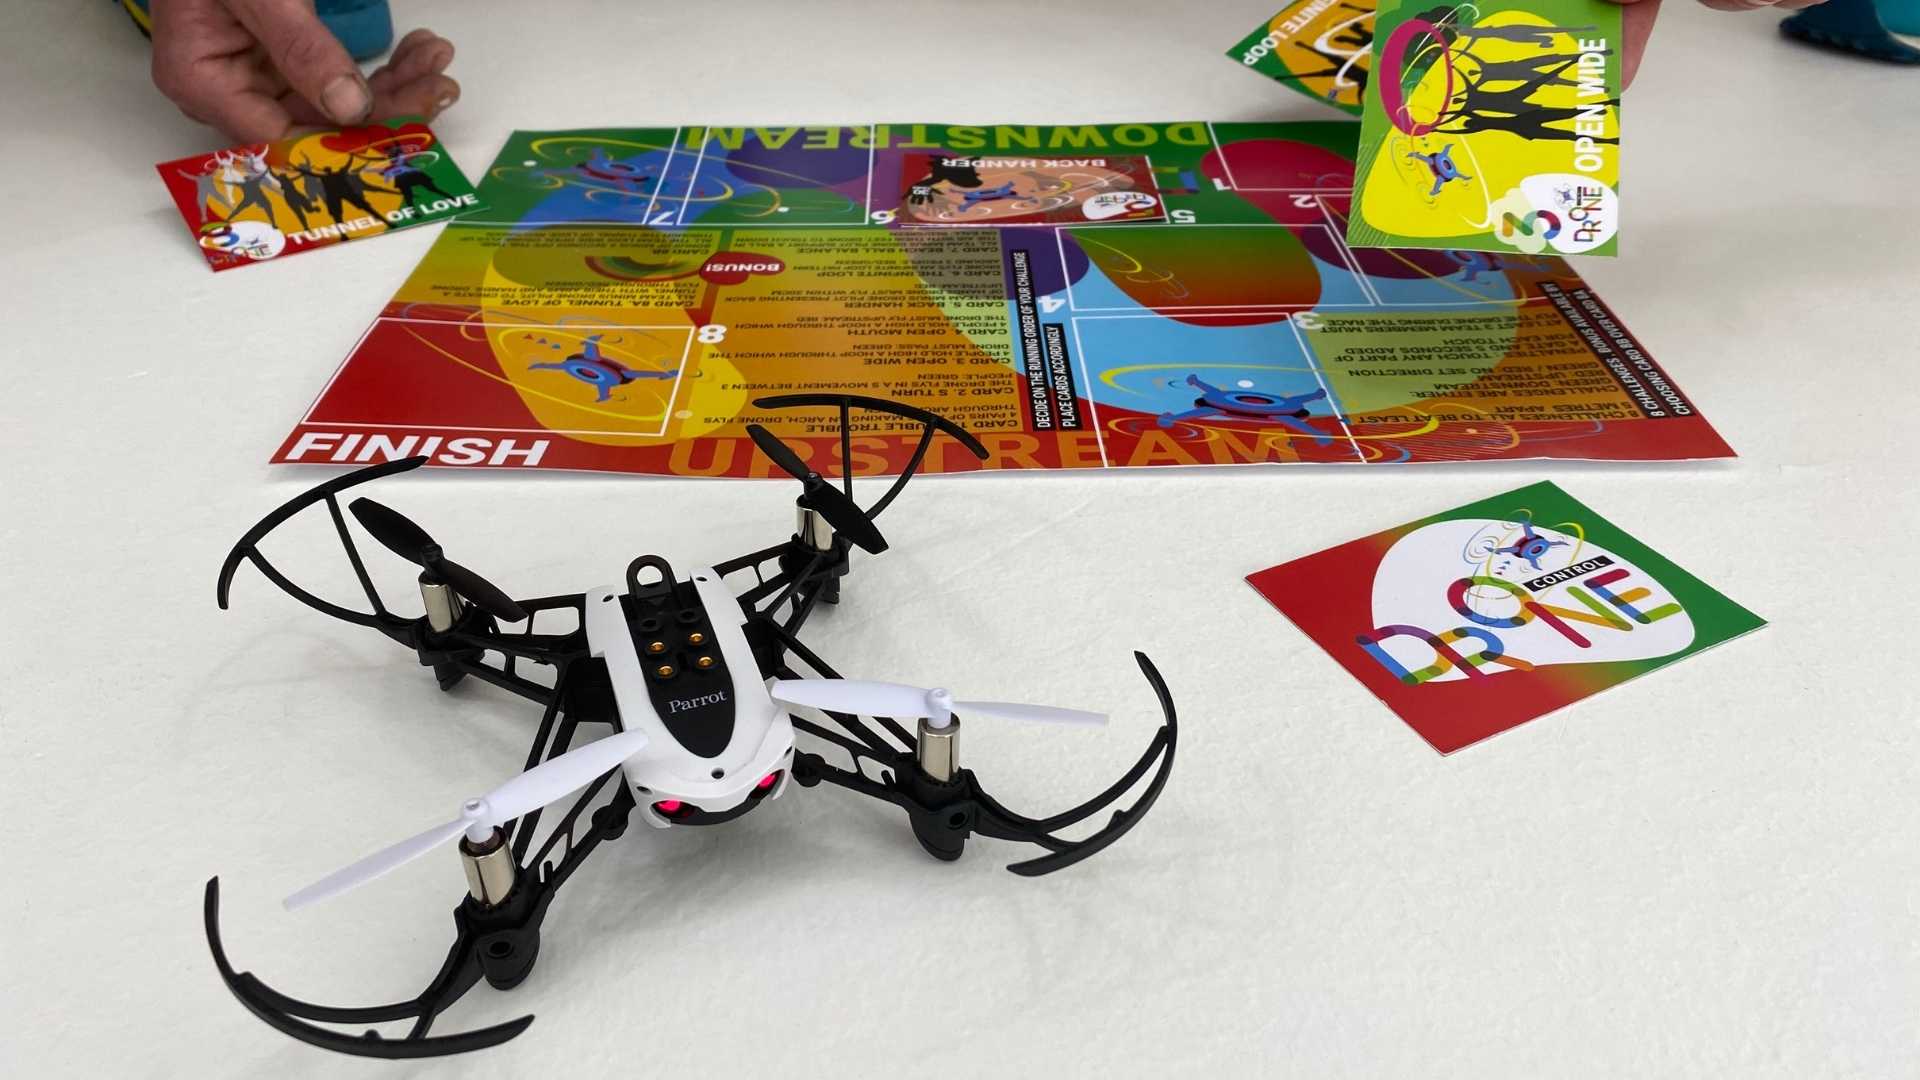 Drone and gameboard for team building program Drone control